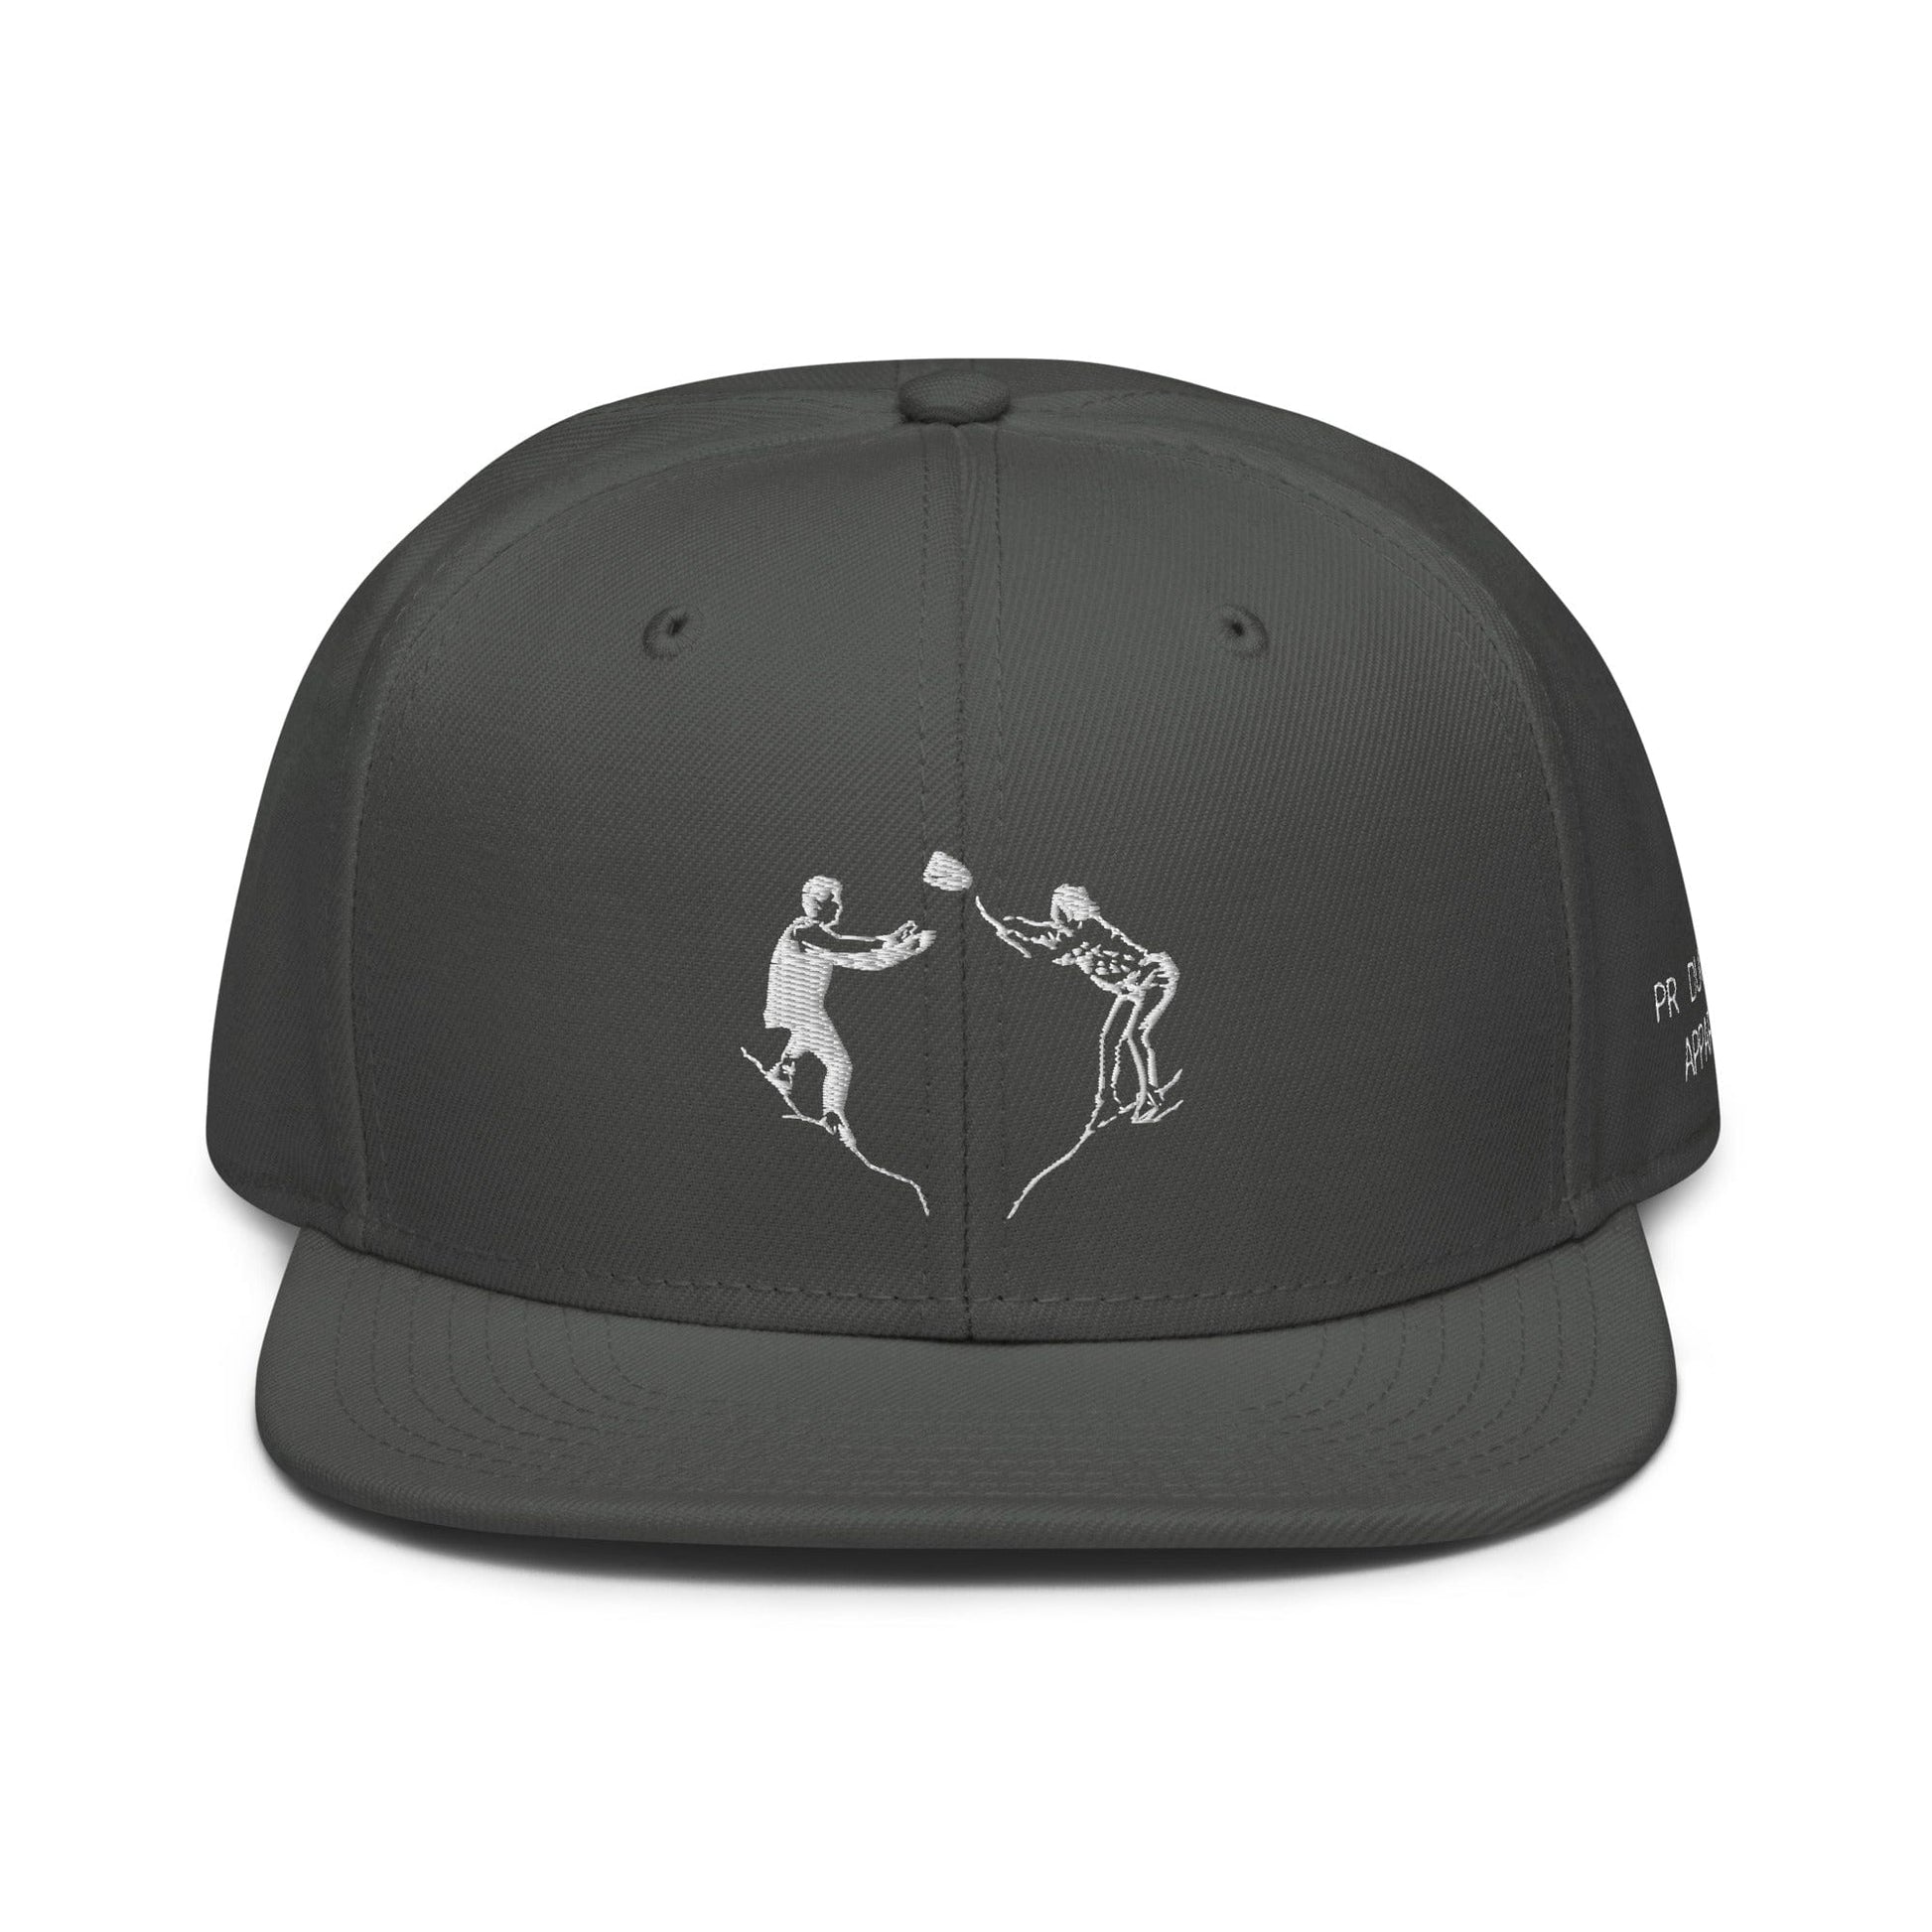 Production Apparel Lens Catch Hat Charcoal gray